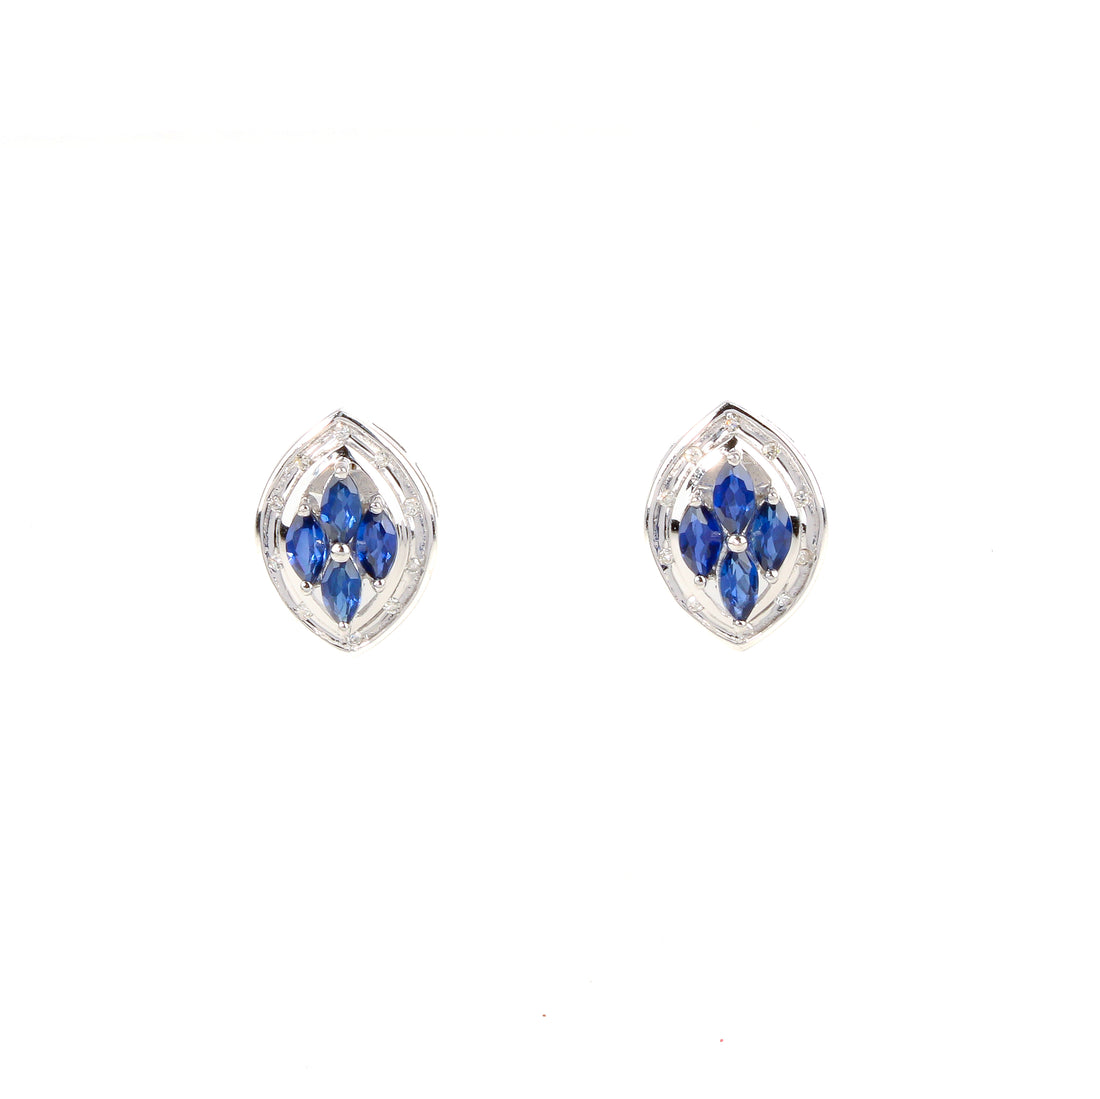 10K White Gold Marquise Synthetic Sapphire Stud Earrings